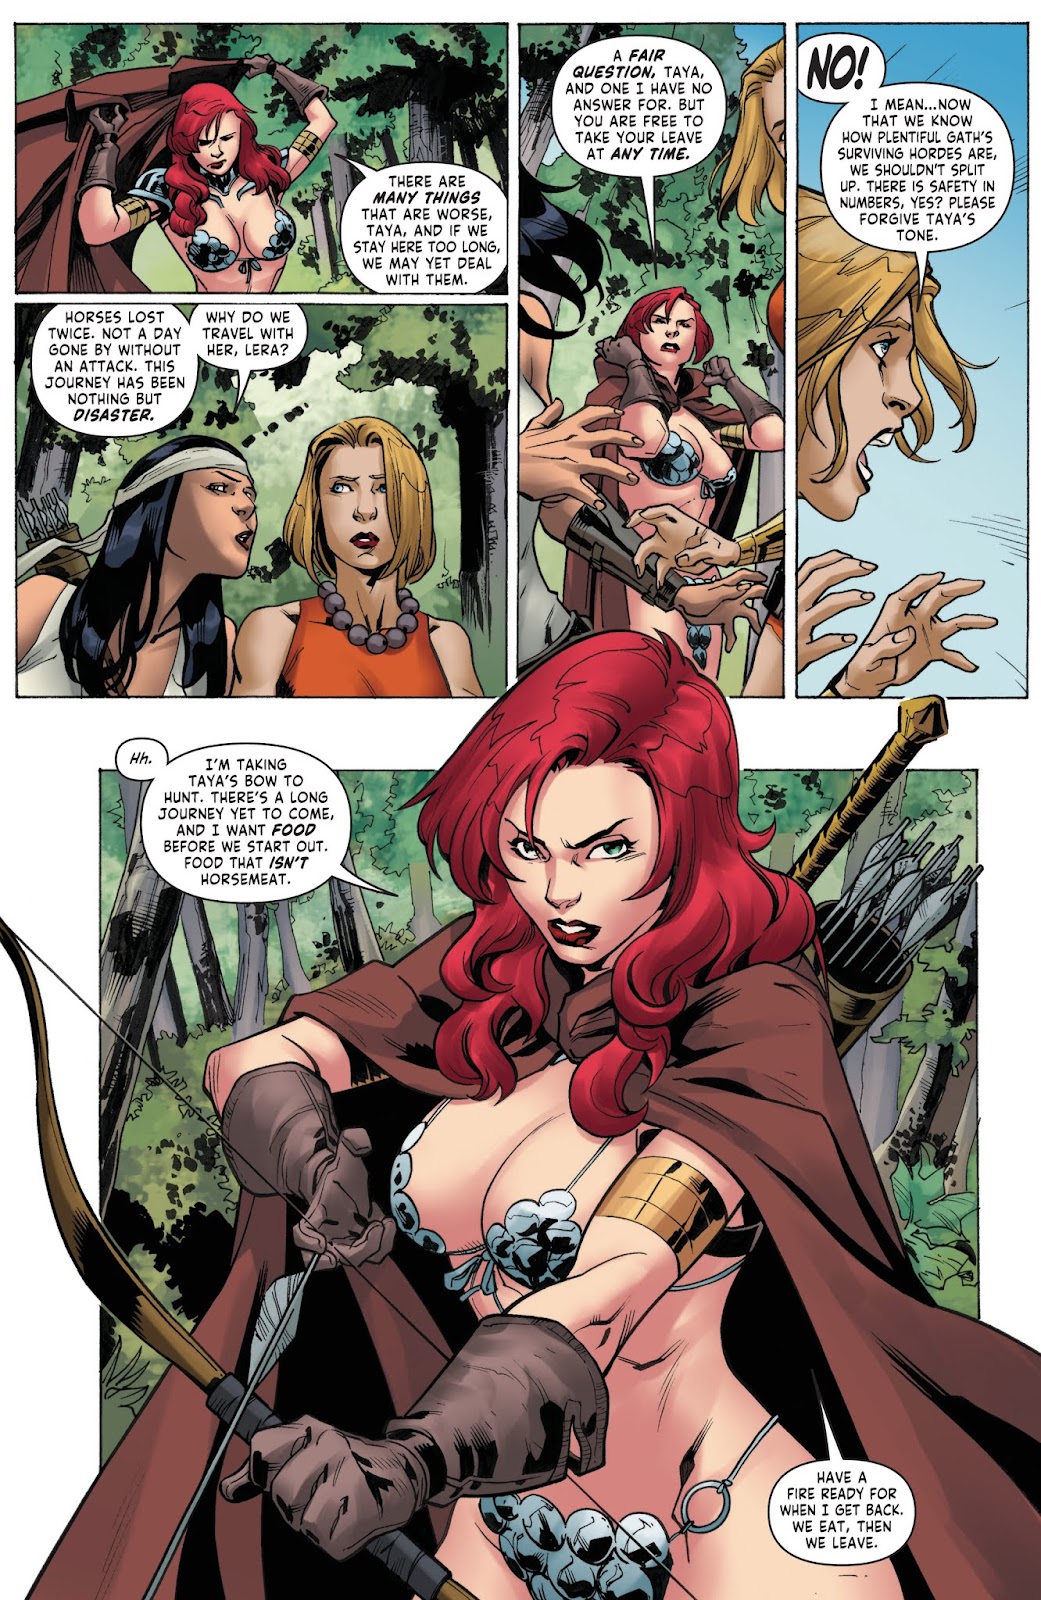 Red Sonja Vol. 4 issue 18 - Page 12